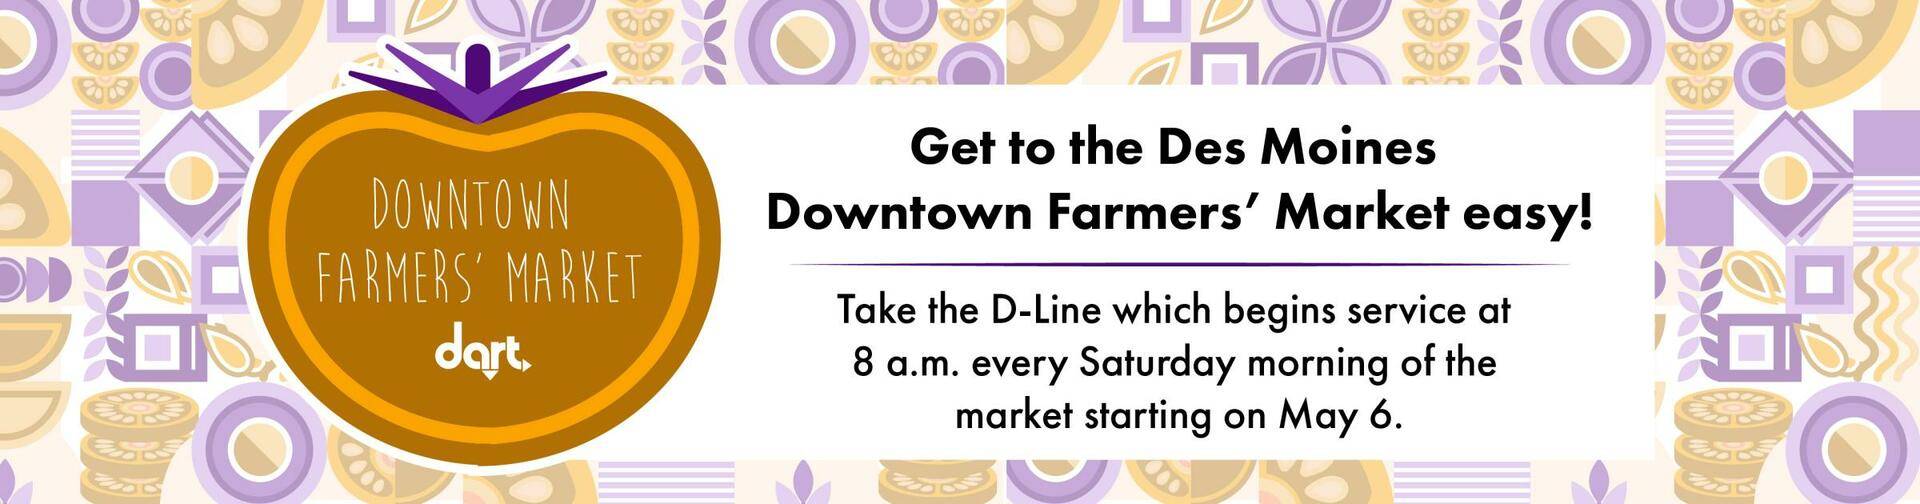 graphic promoting the D-Line to take to the Farmer's Market